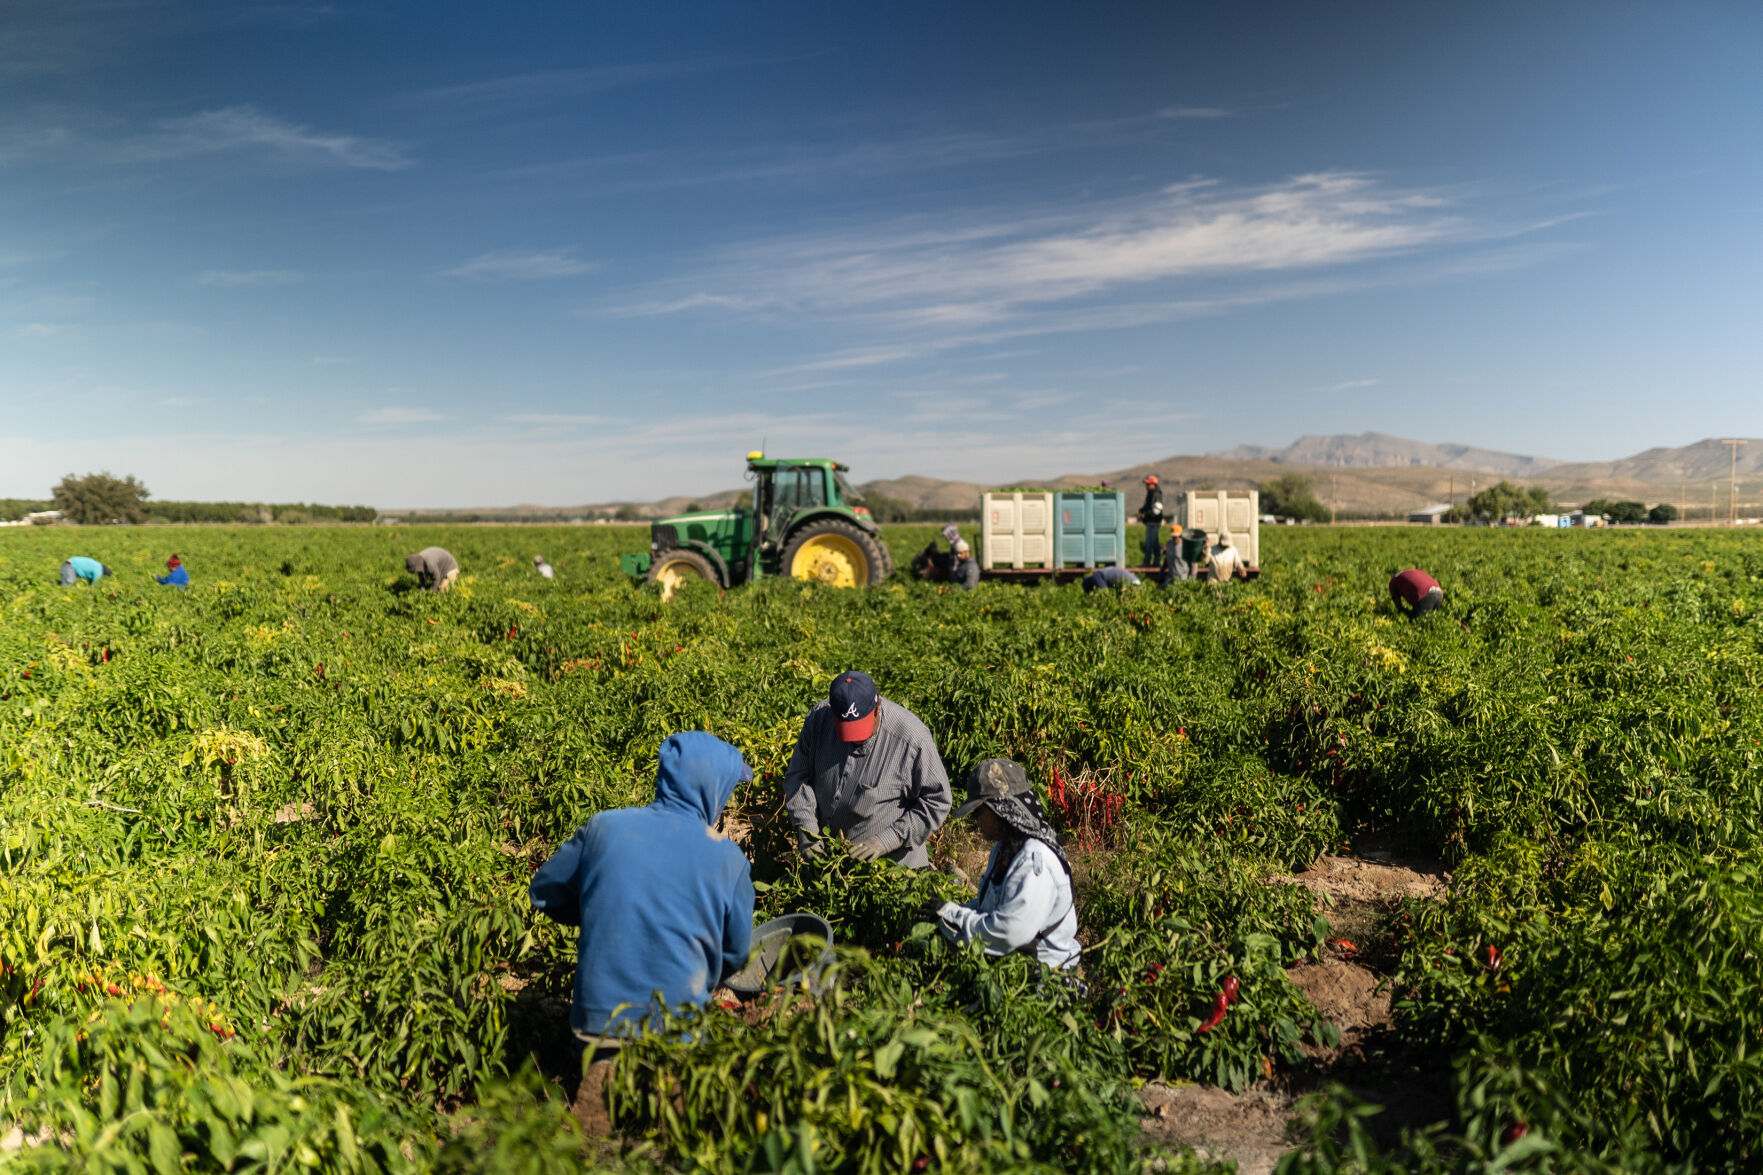 After nearly 4 decades, farmer gives up growing chile amid worker shortage Local News elpasoinc